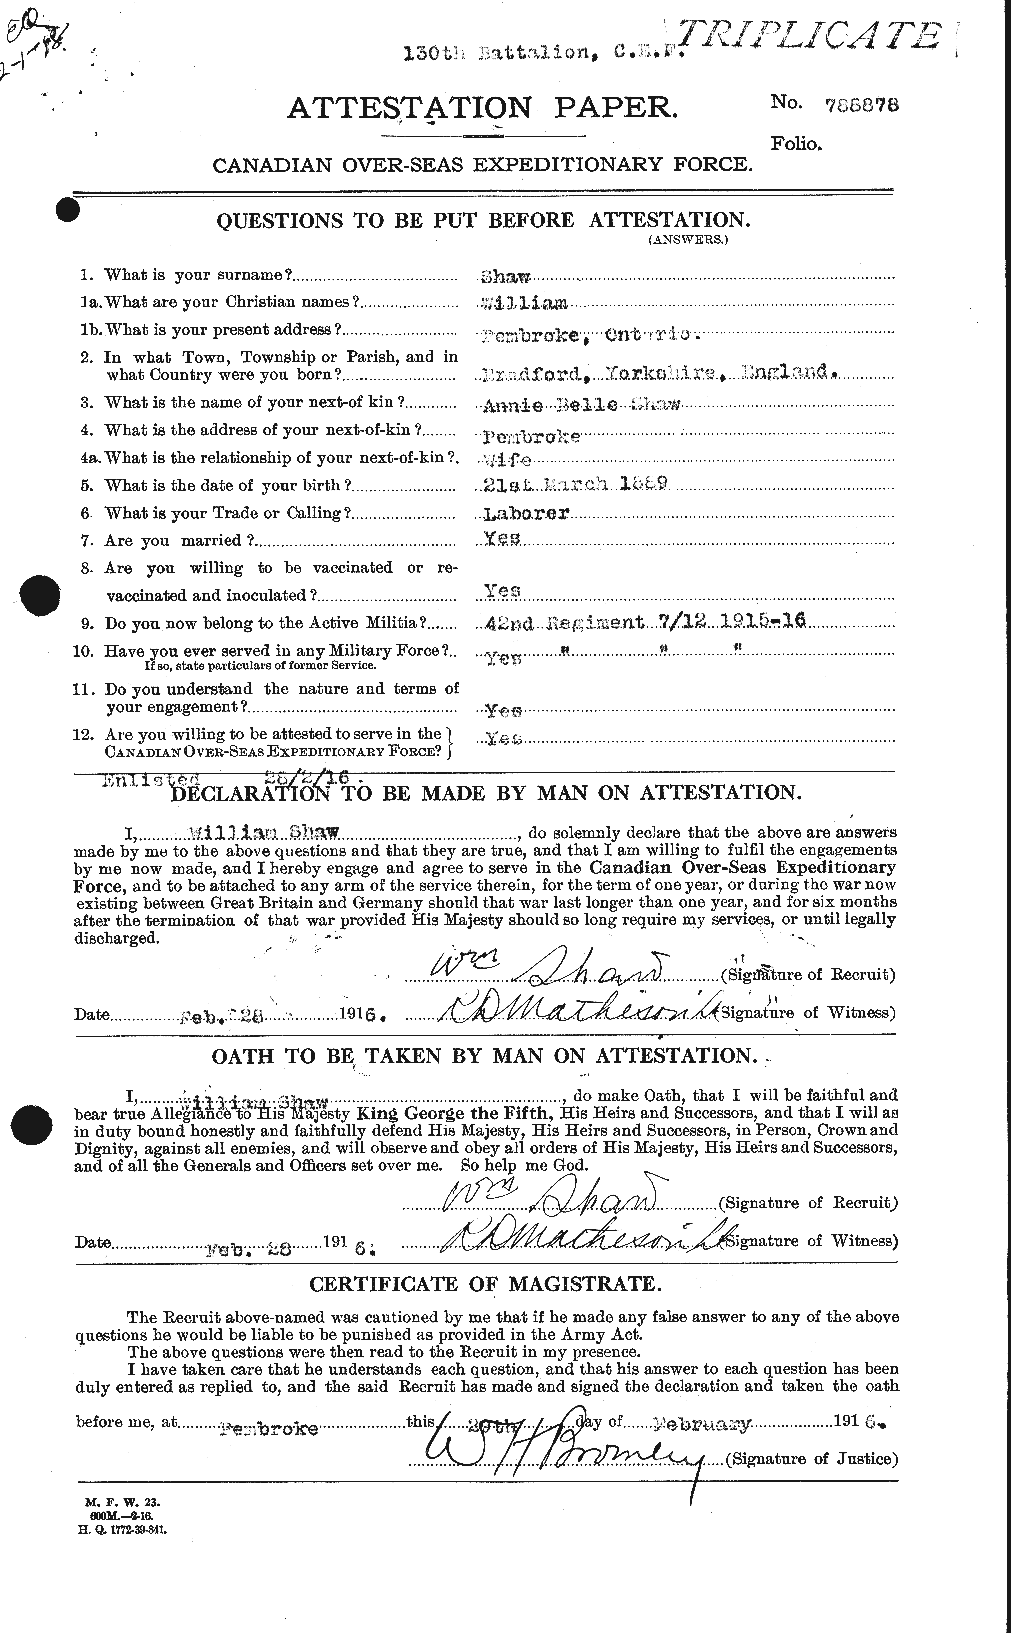 Personnel Records of the First World War - CEF 089441a